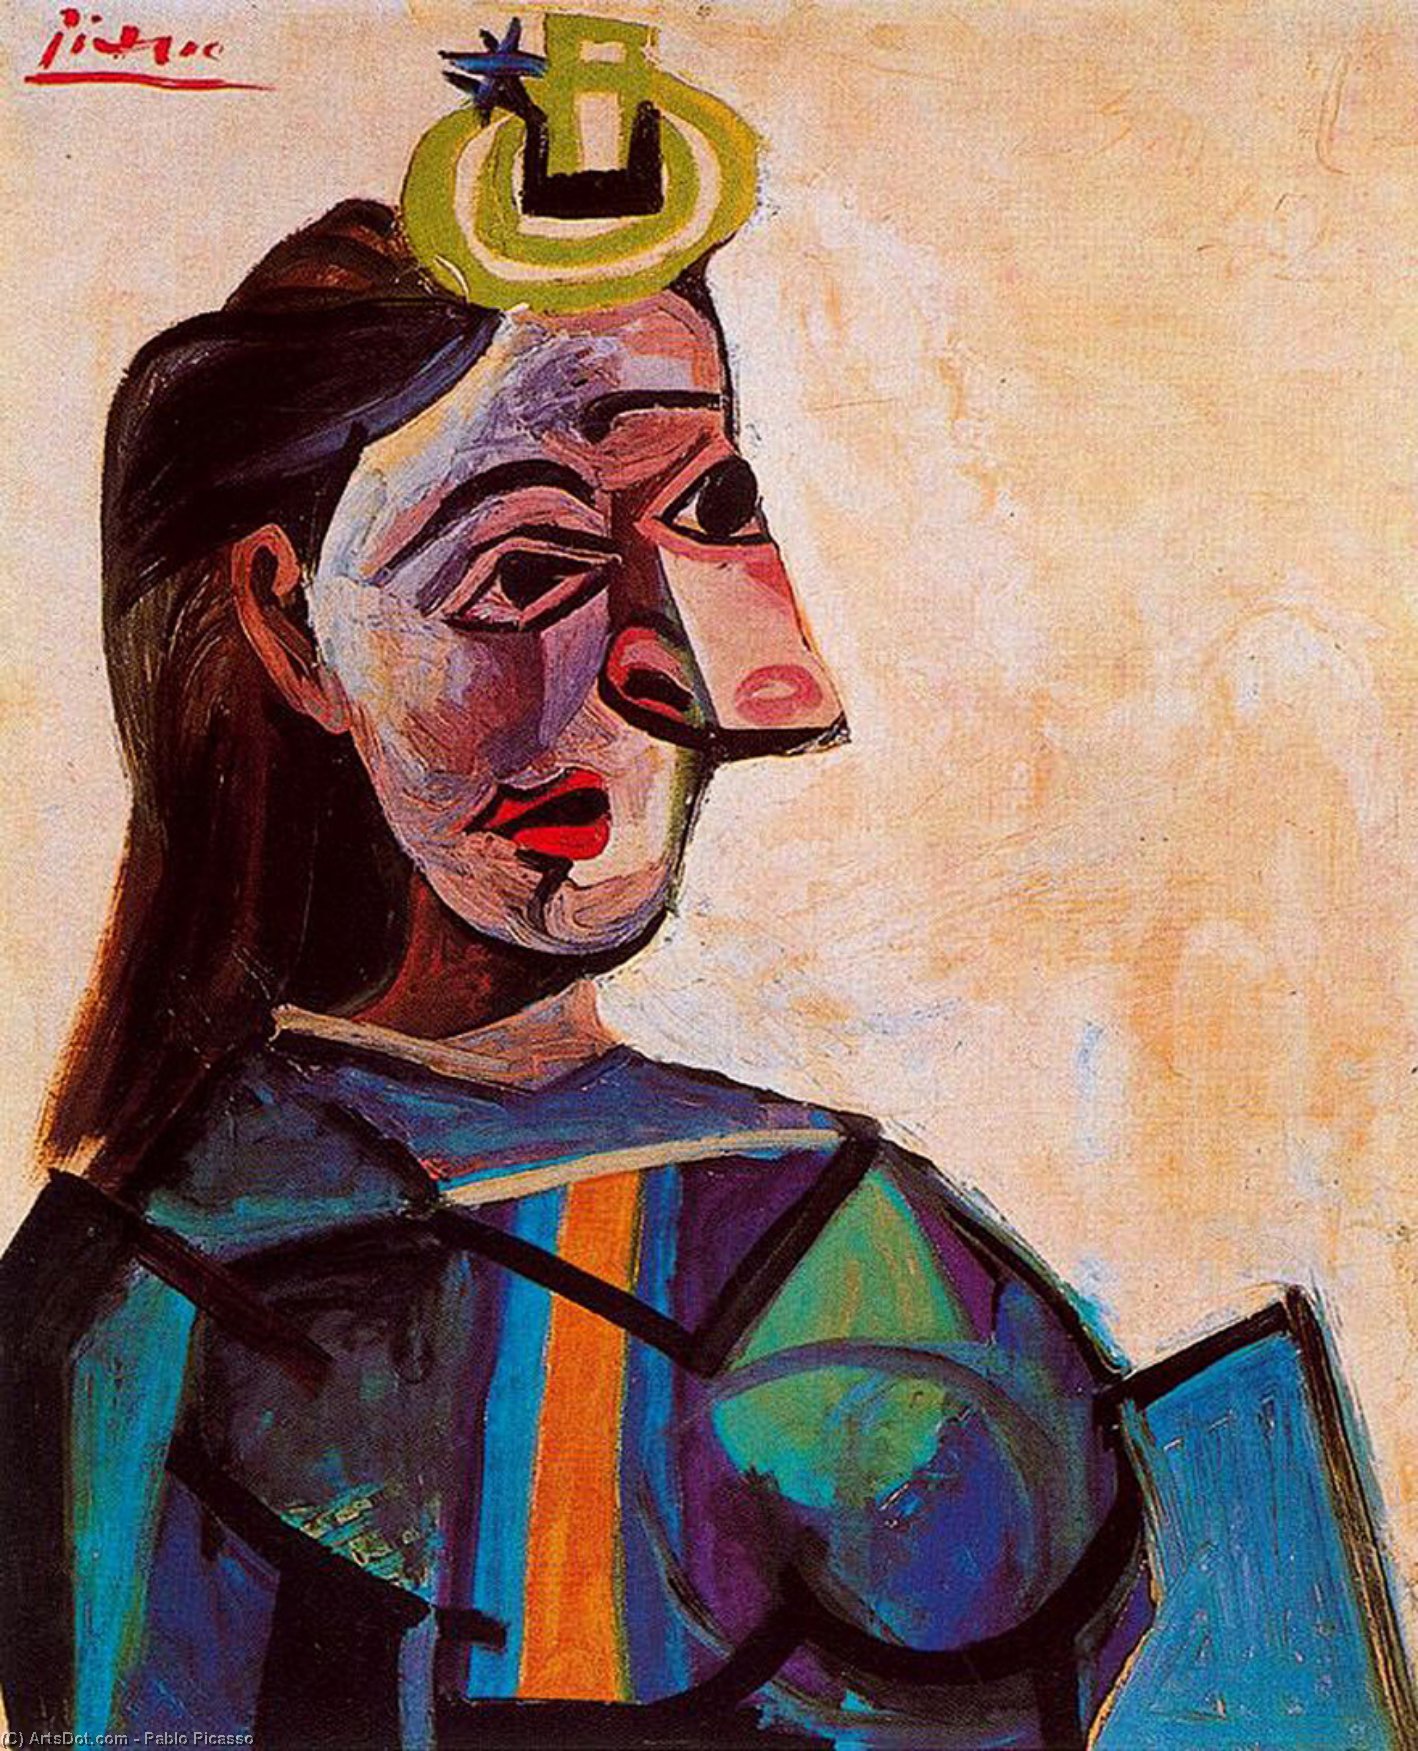 WikiOO.org - Encyclopedia of Fine Arts - Malba, Artwork Pablo Picasso - Bust of a woman